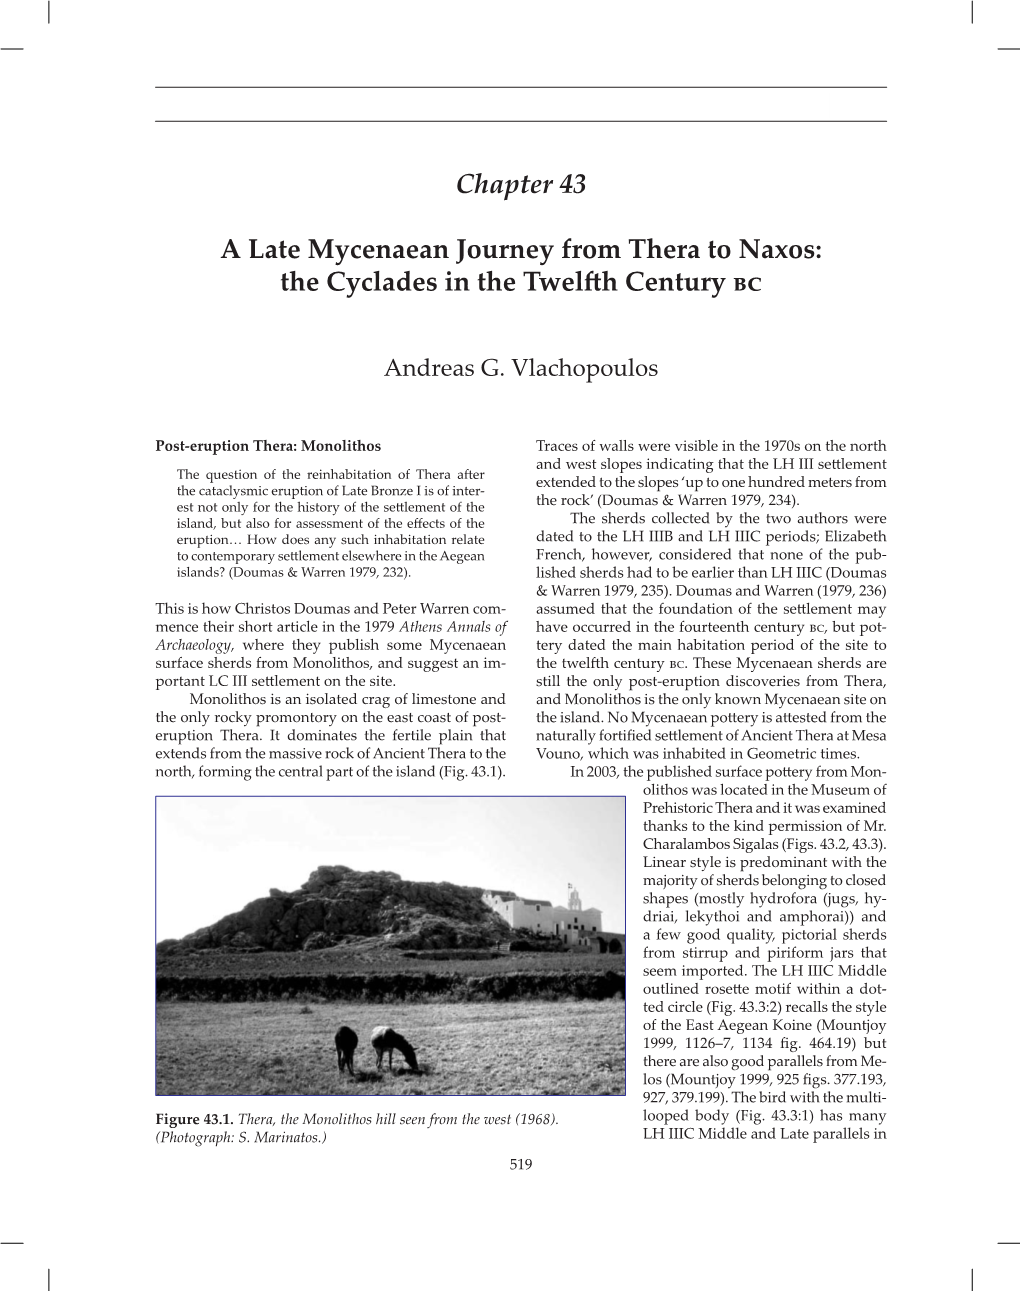 Chapter 43 a Late Mycenaean Journey from Thera to Naxos: The